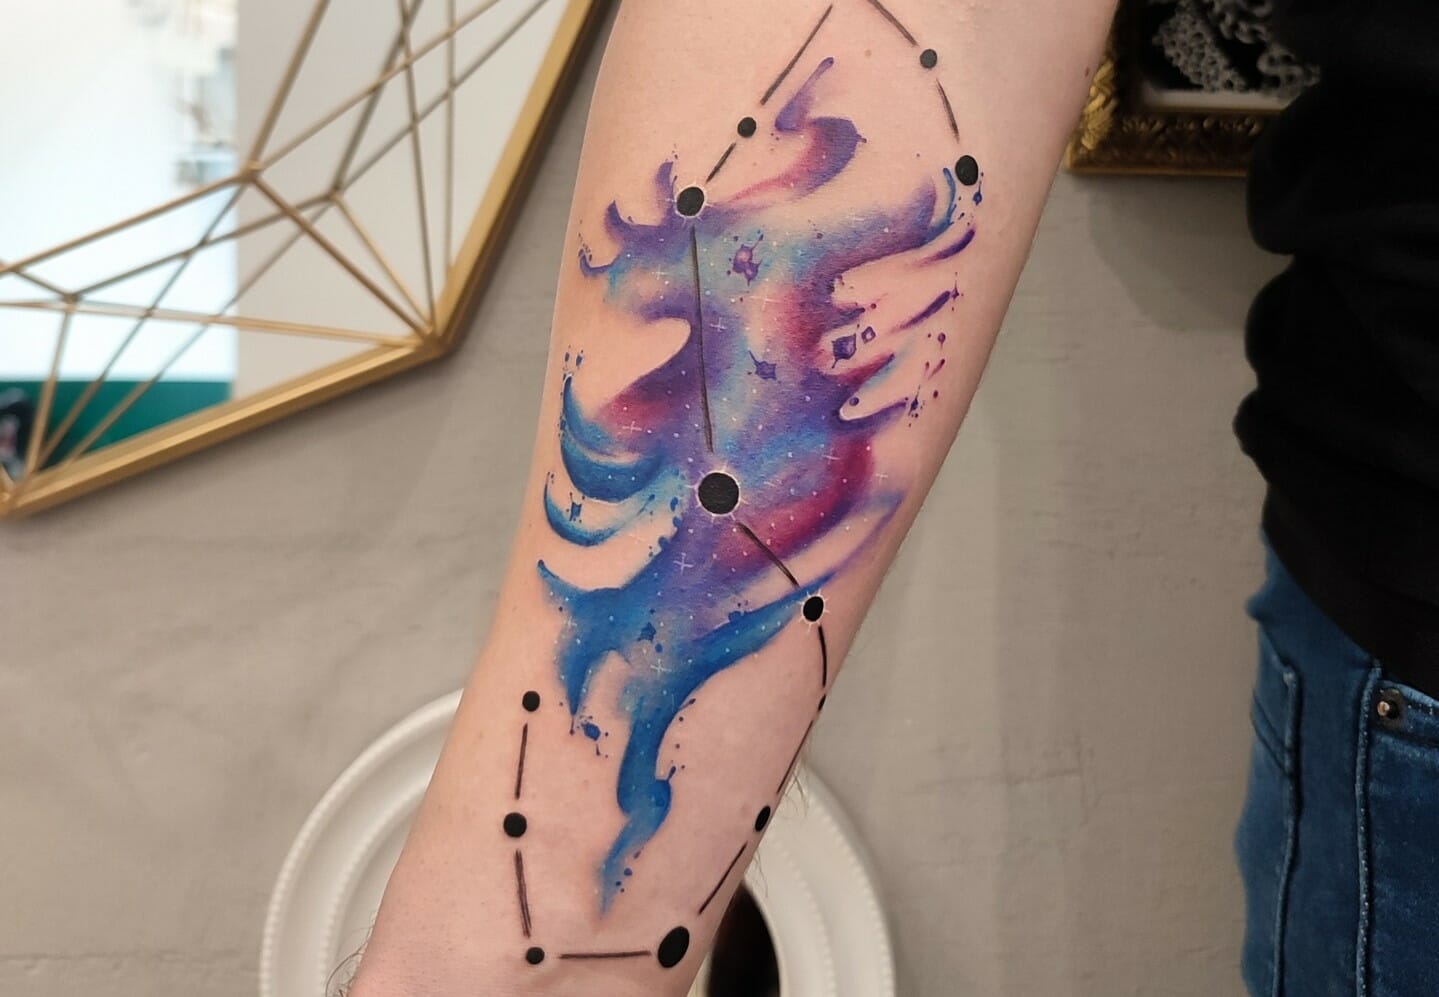 101 Best Sagittarius Constellation Tattoo Ideas You Have To See To Believe!